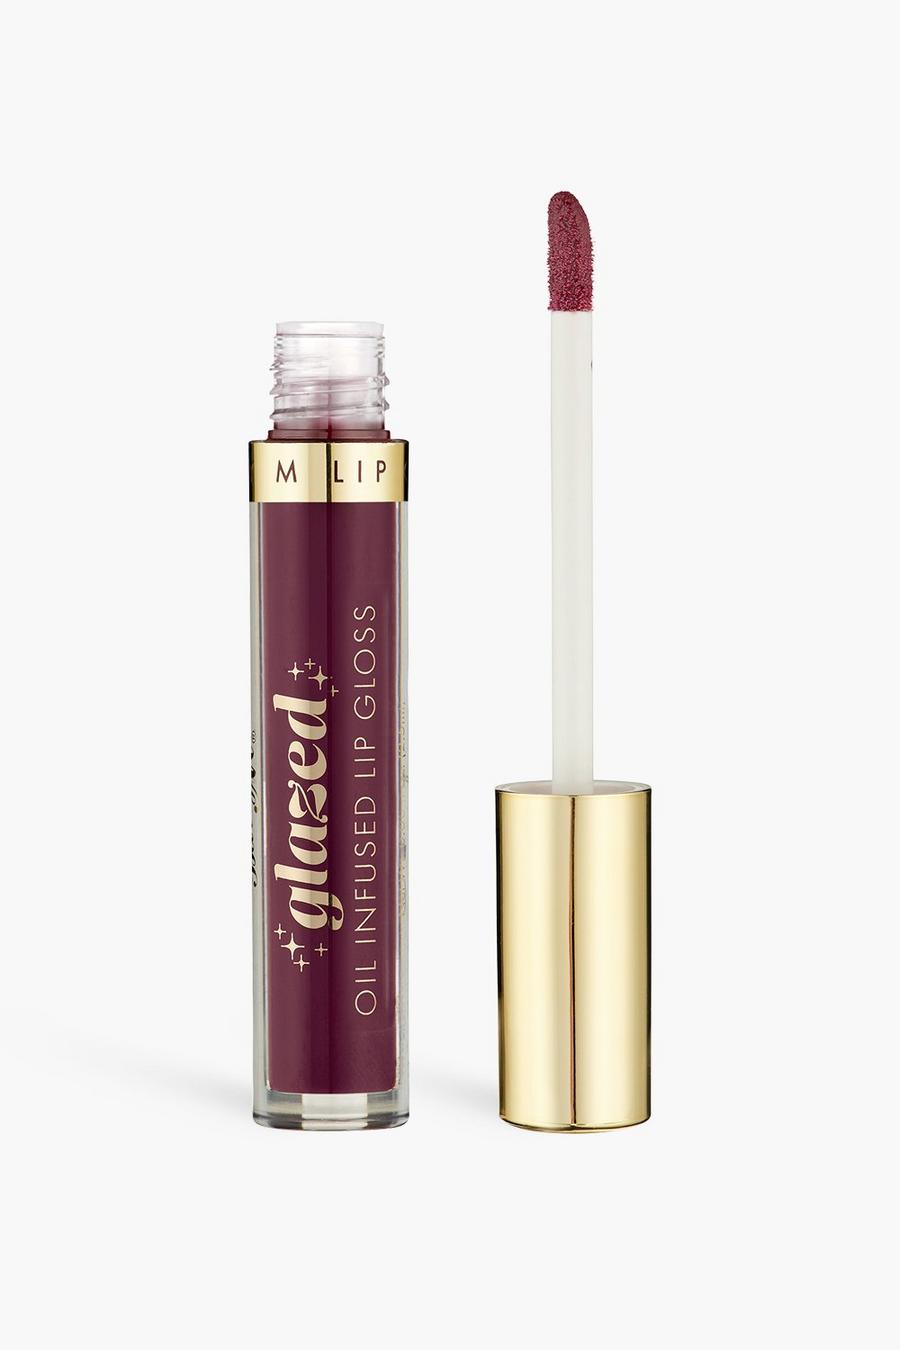 Berry red Barry M Glazed Oil Lip Gloss - So Tempting